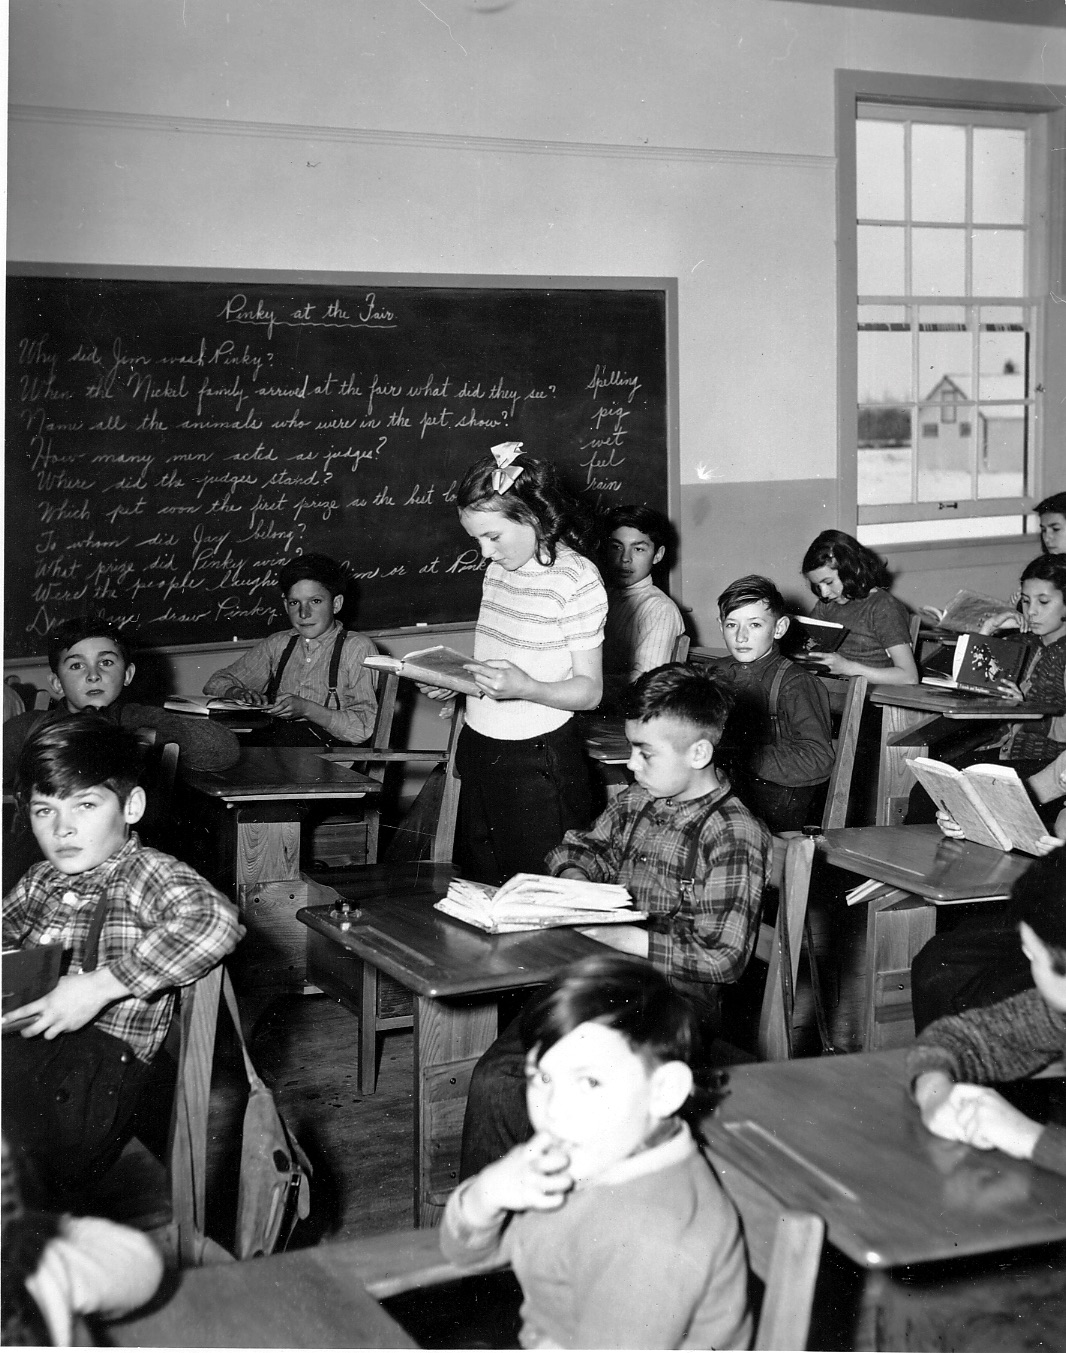 The whole part of the residential school was a part of a bigger scheme of colonization. There was intent; the schools were there with the intent to change people, to make them like others and to make them not fit." - Shirley Flowers, Statement to the Truth and Reconciliation Commission of Canada